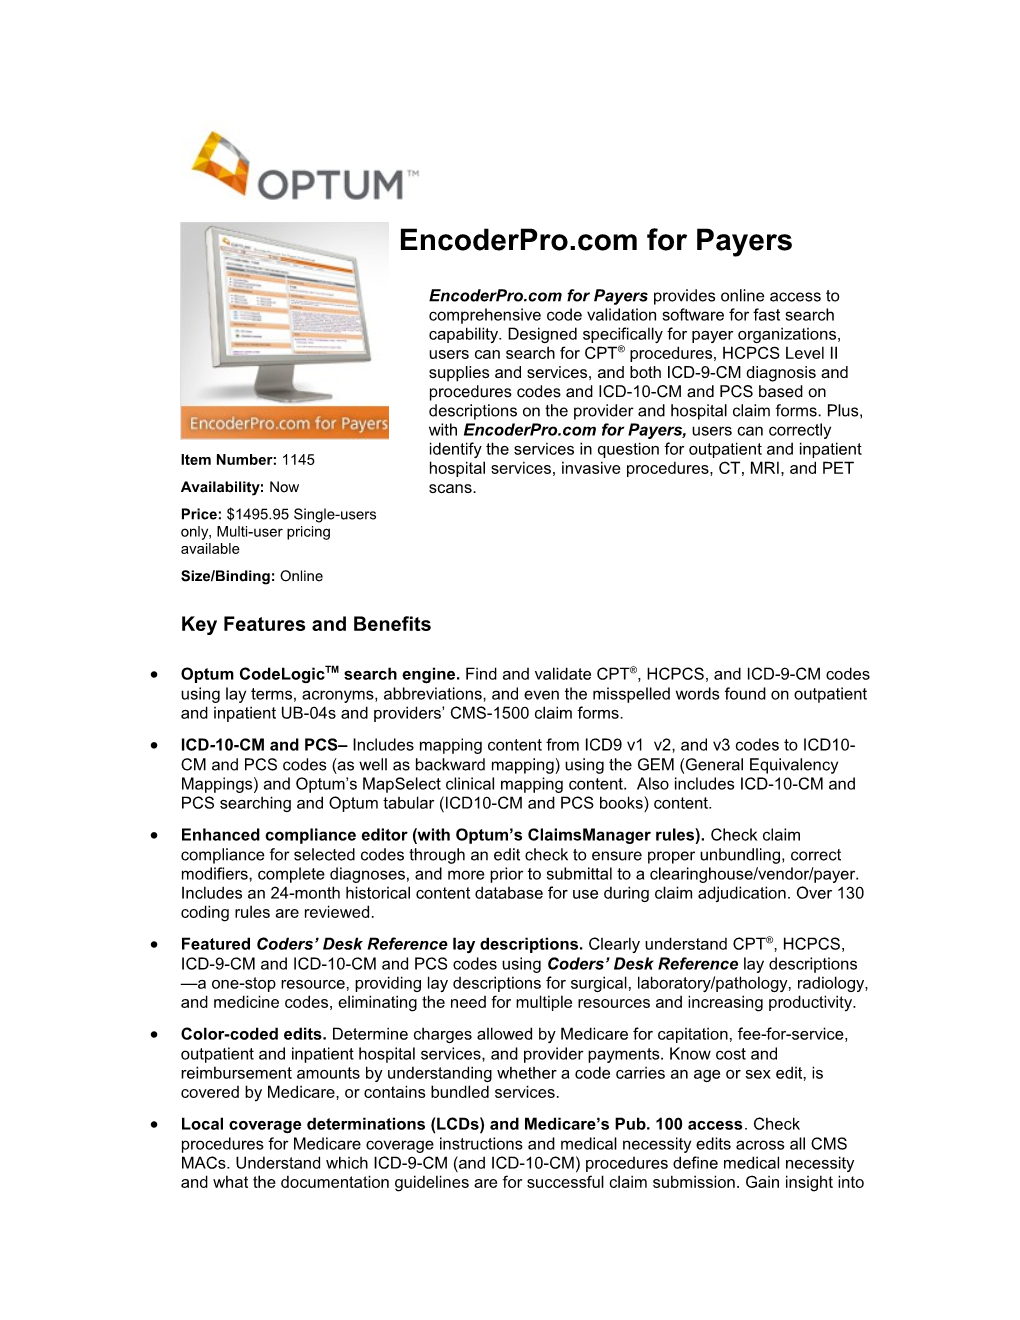 Optum Codelogictm Search Engine. Find and Validate CPT , HCPCS, and ICD-9-CM Codes Using